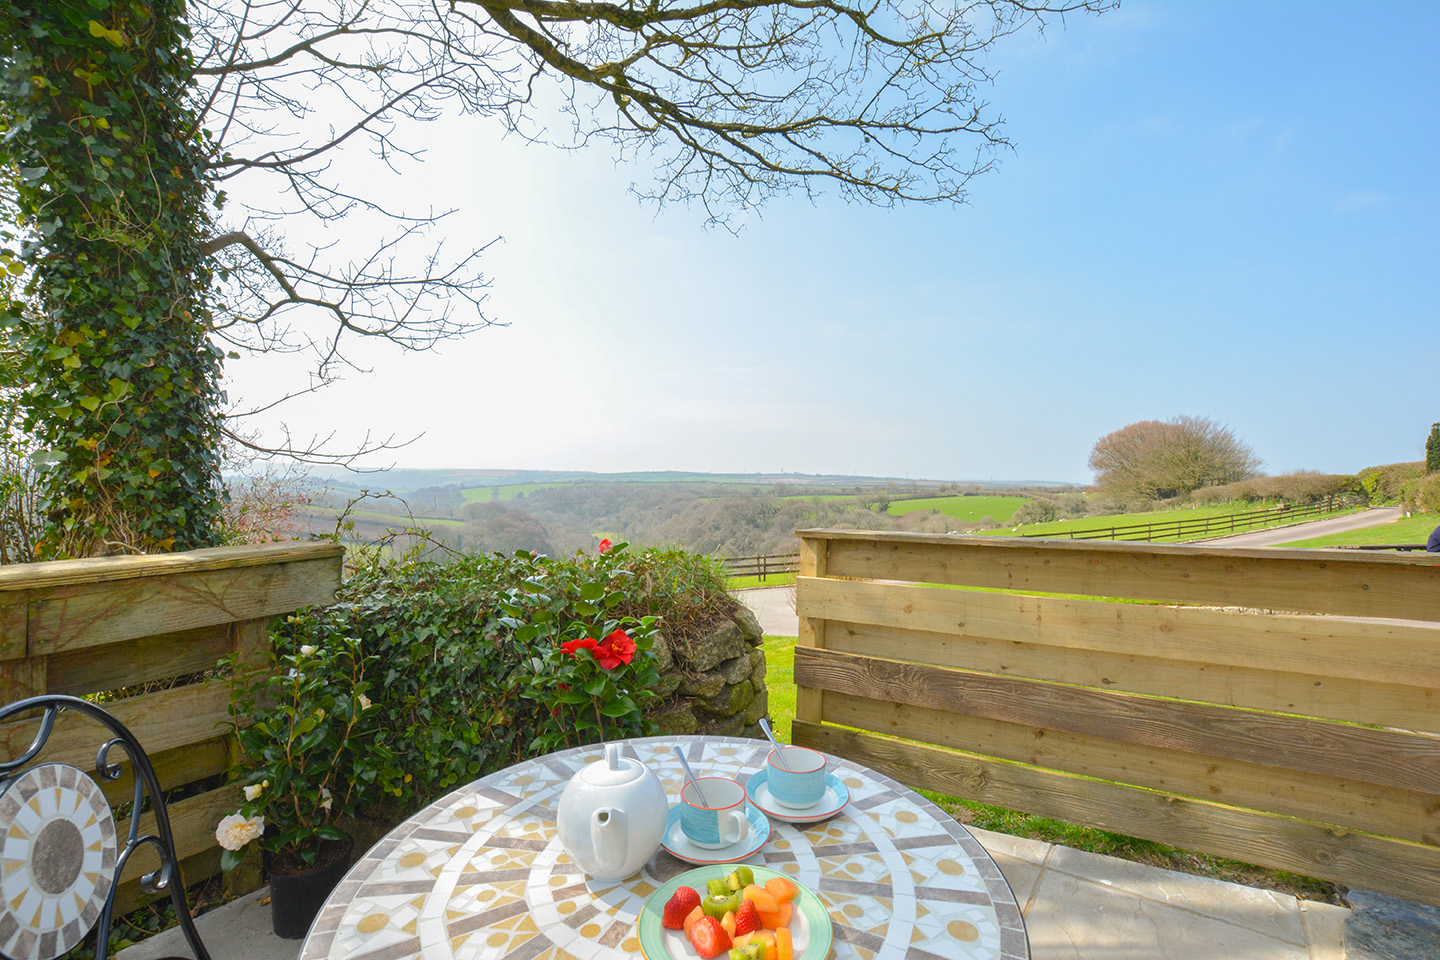 The view from the garden at Jingles luxury self catering holiday cottage at Penrose Burden in North Cornwall near Bodmin Moor03.jpg